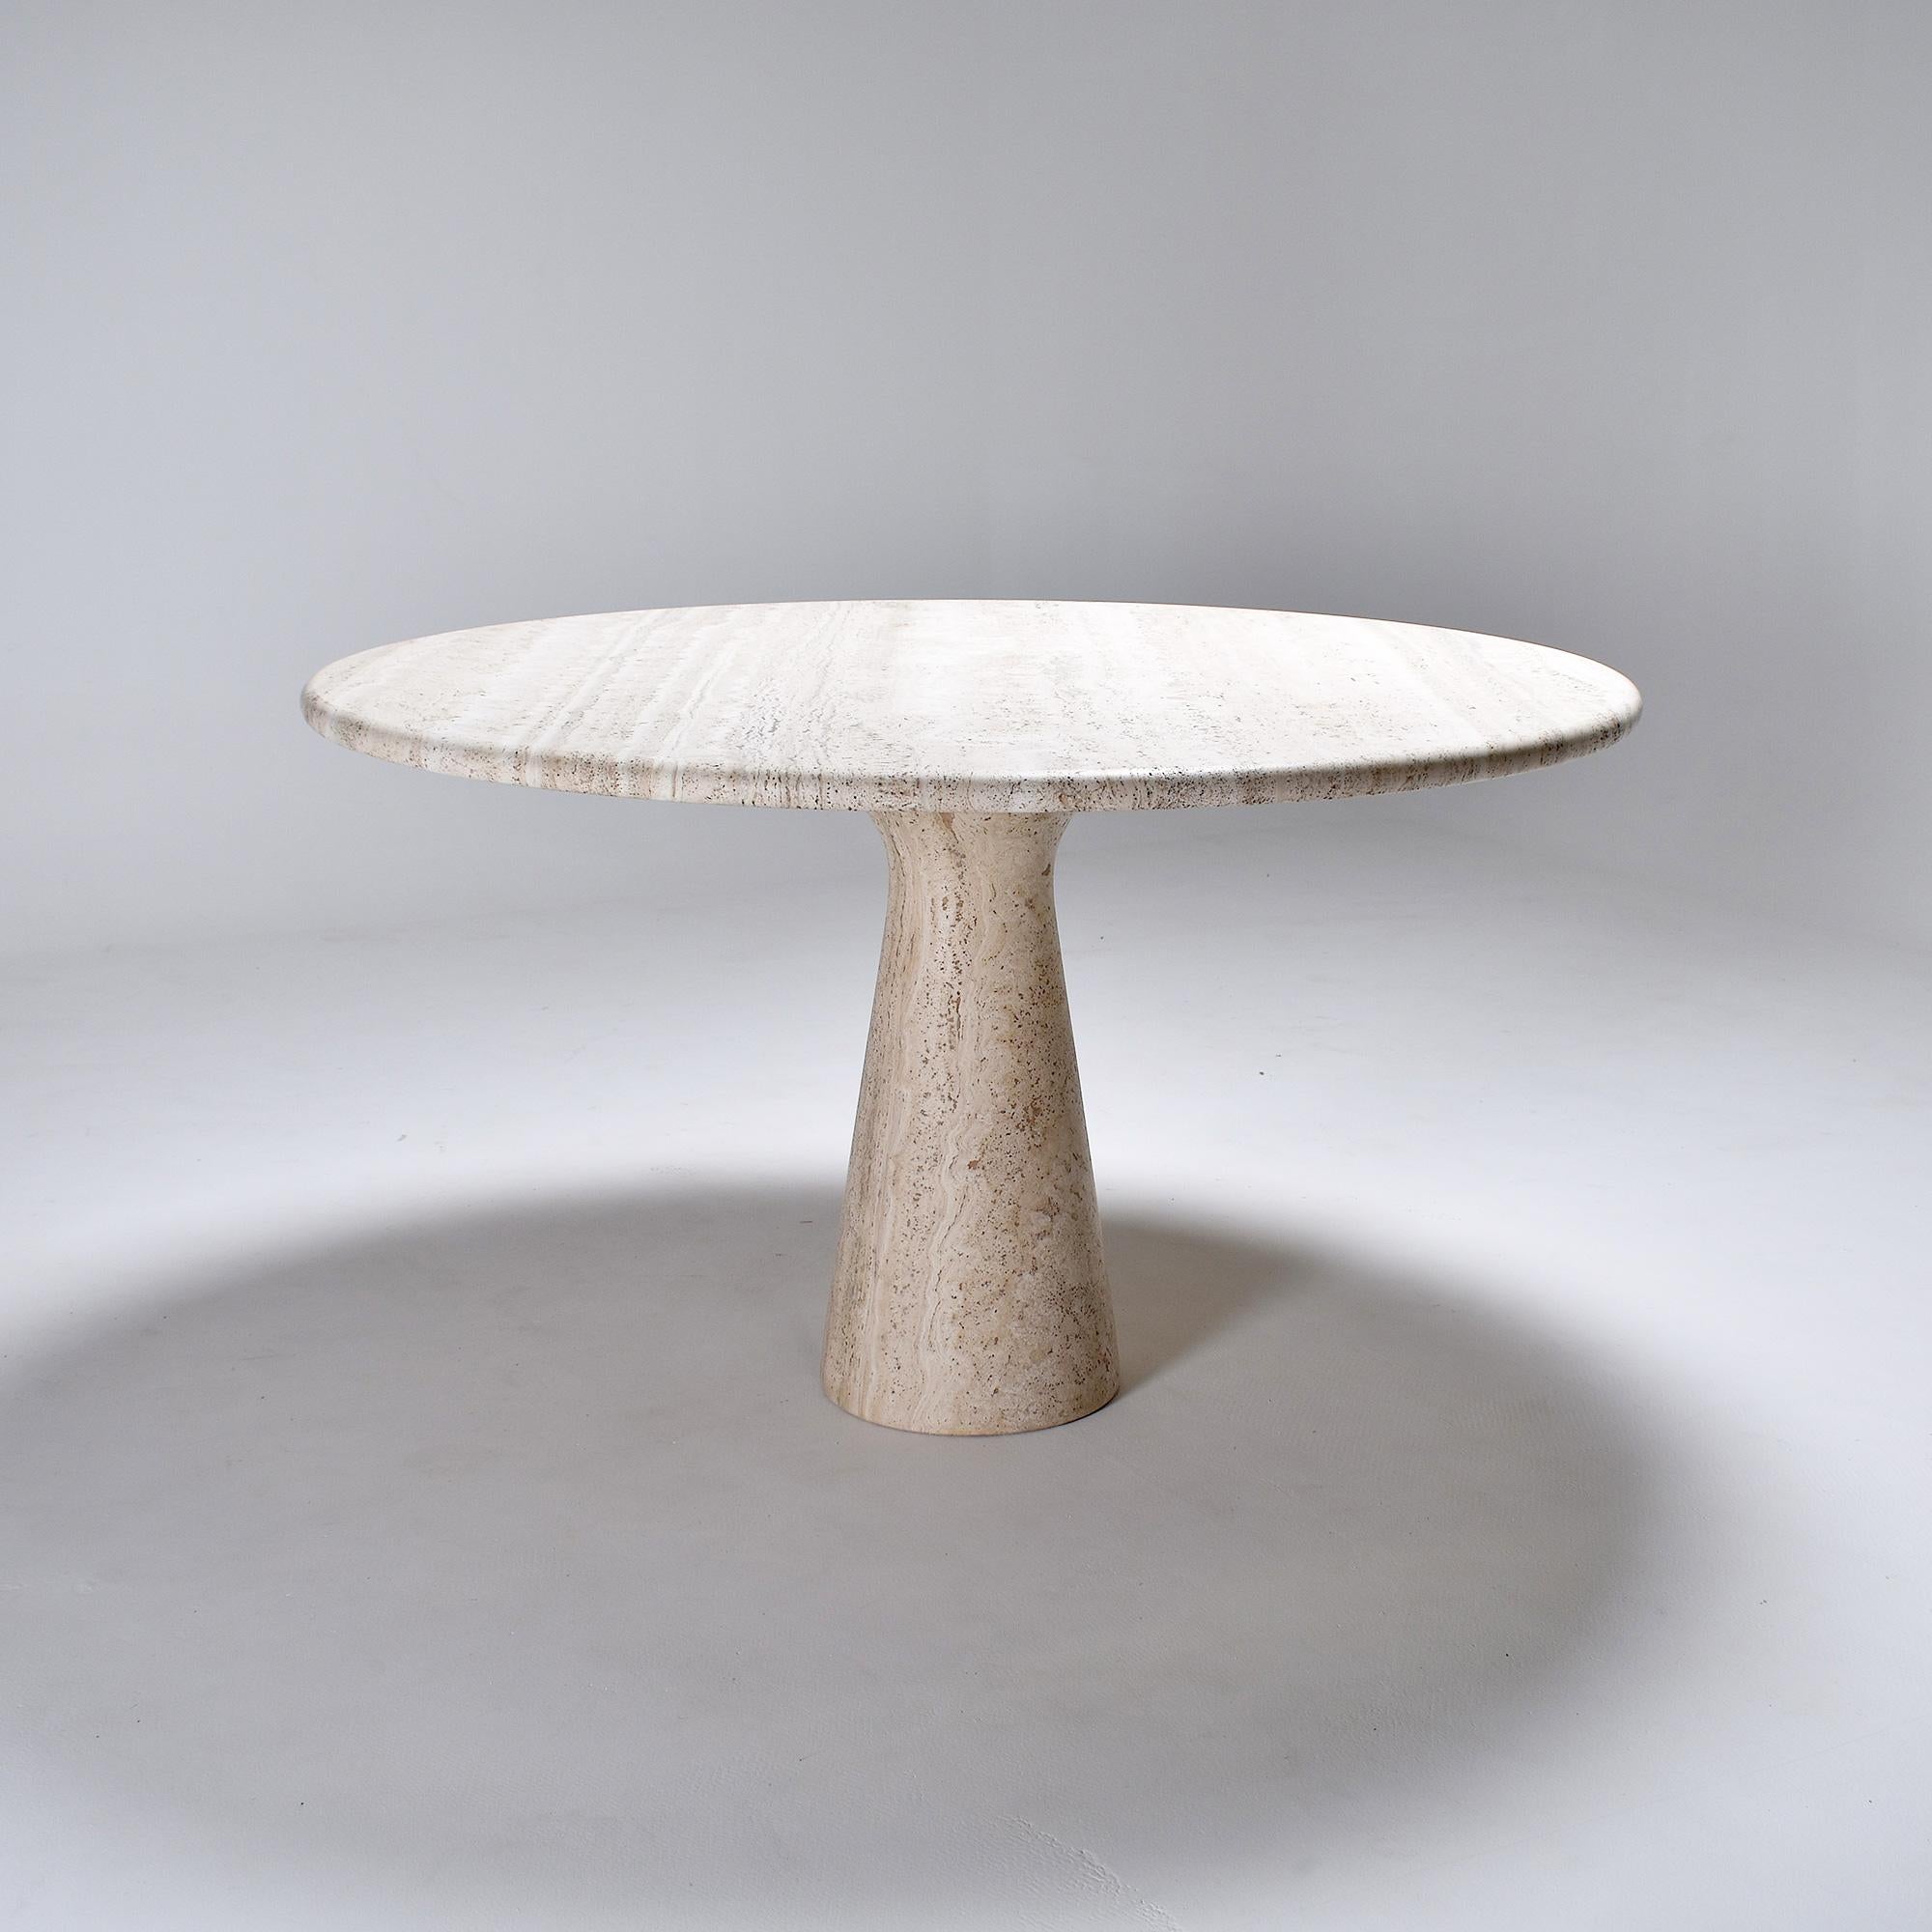 Neoclassical Revival Round Travertine Pedestal Dining Table